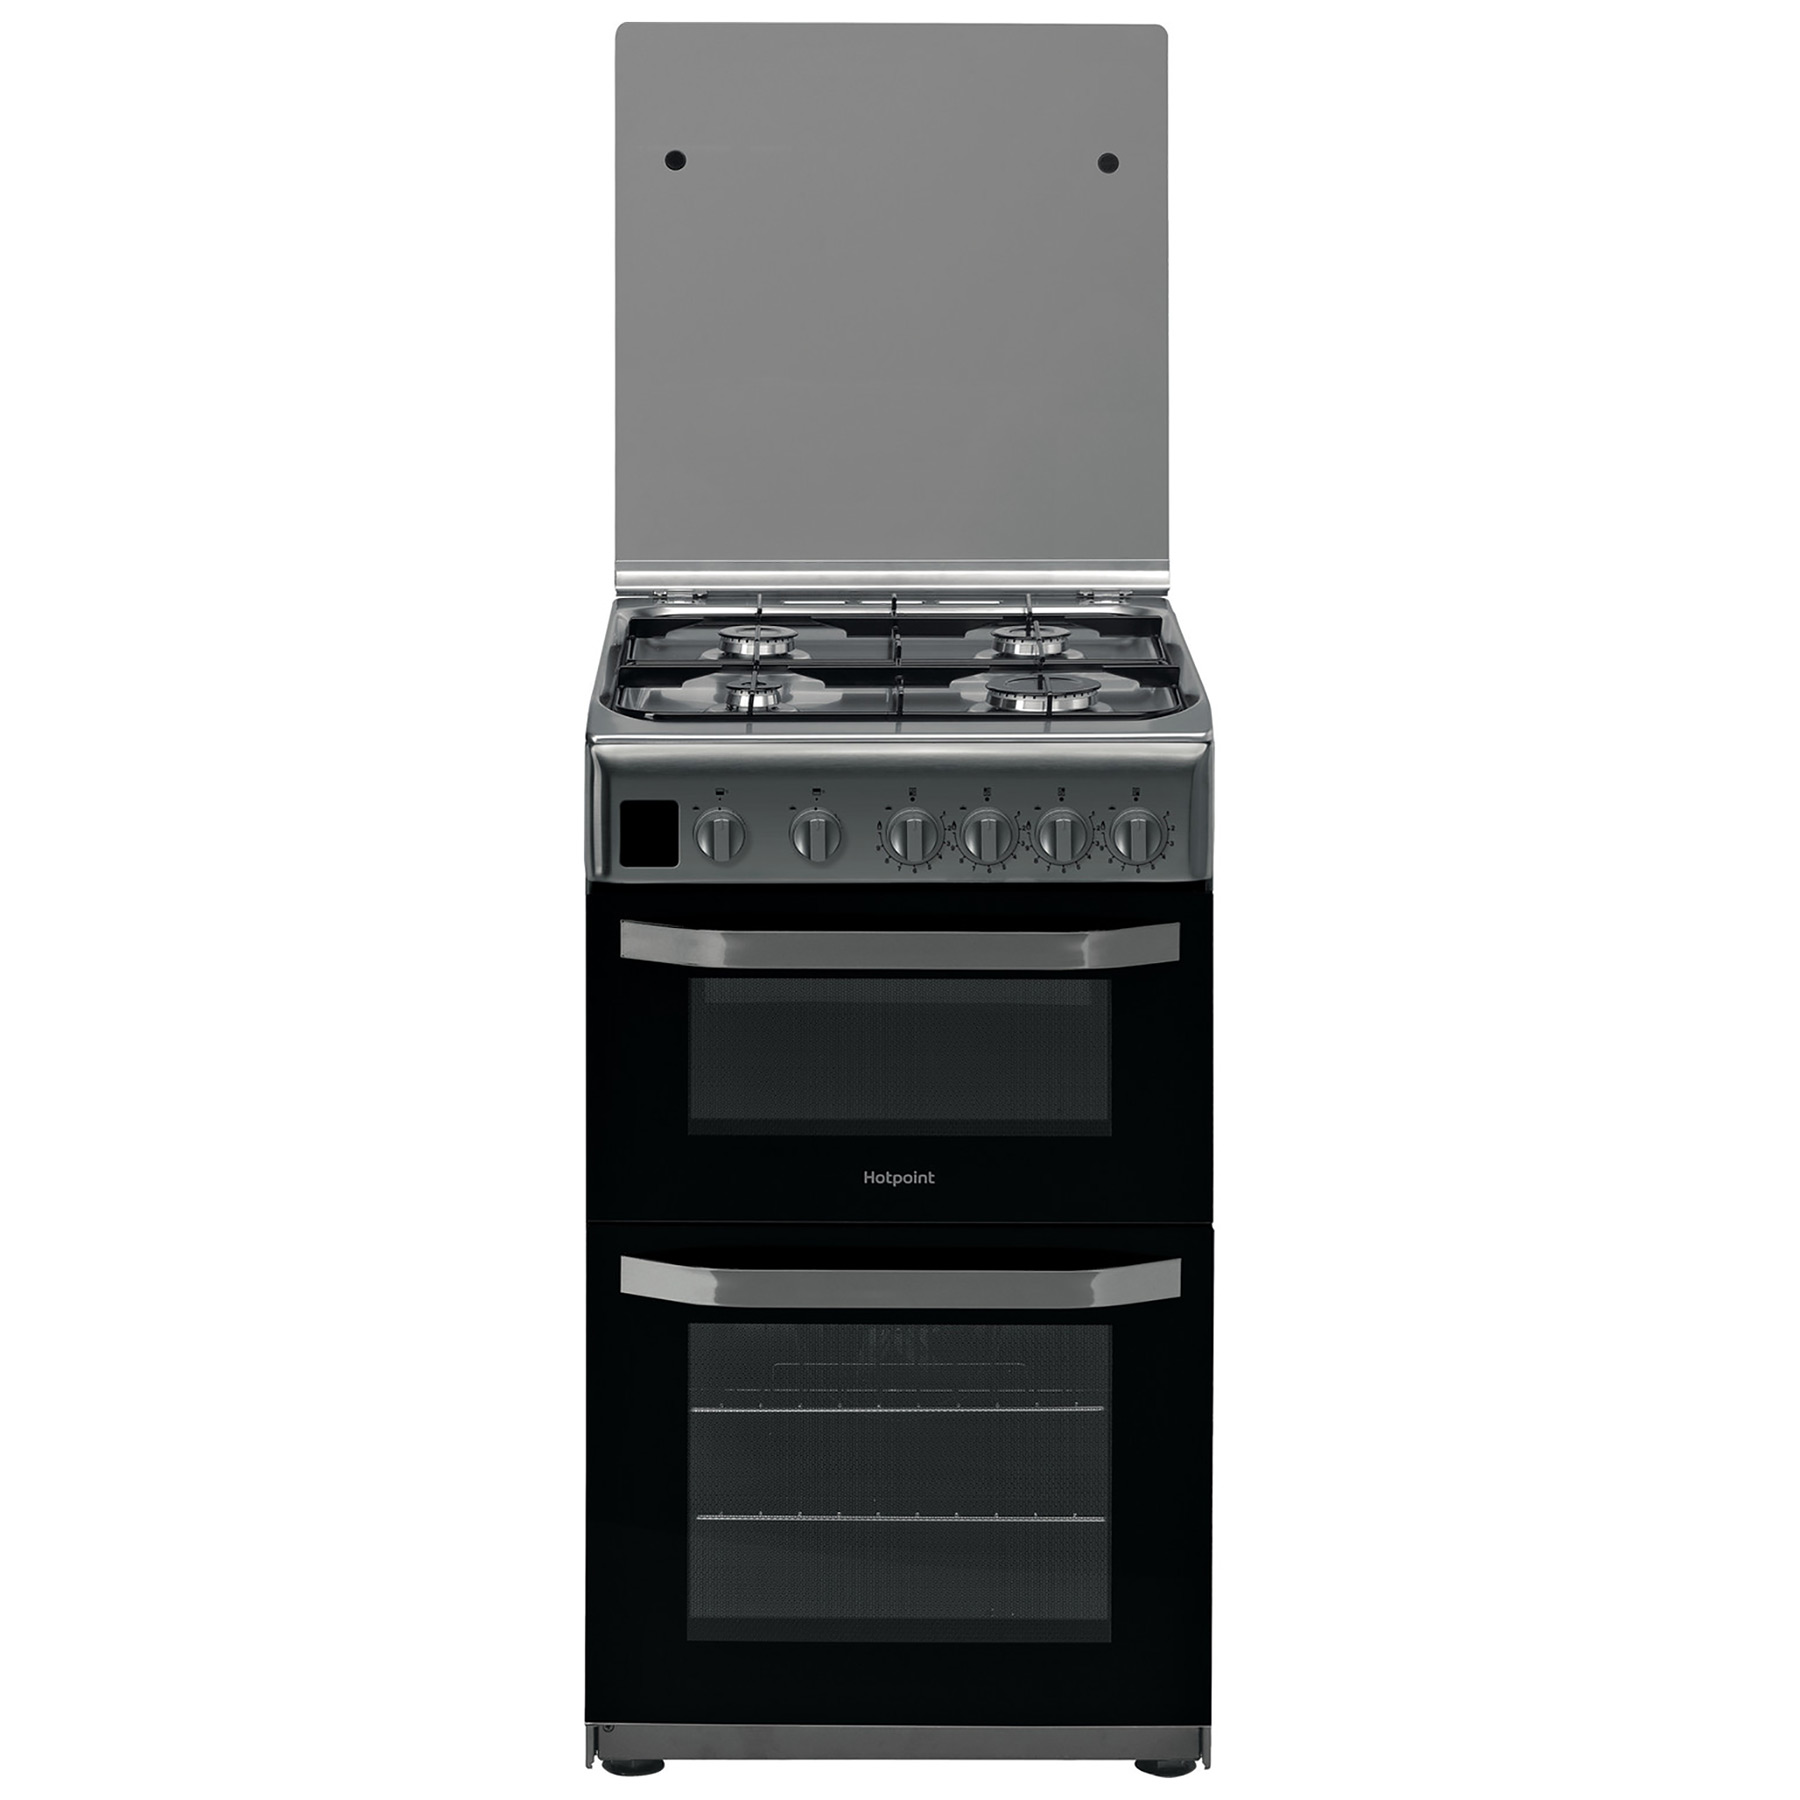 Image of Hotpoint HD5G00CCX 50cm Double Oven Gas Cooker in St St Catalytic Line